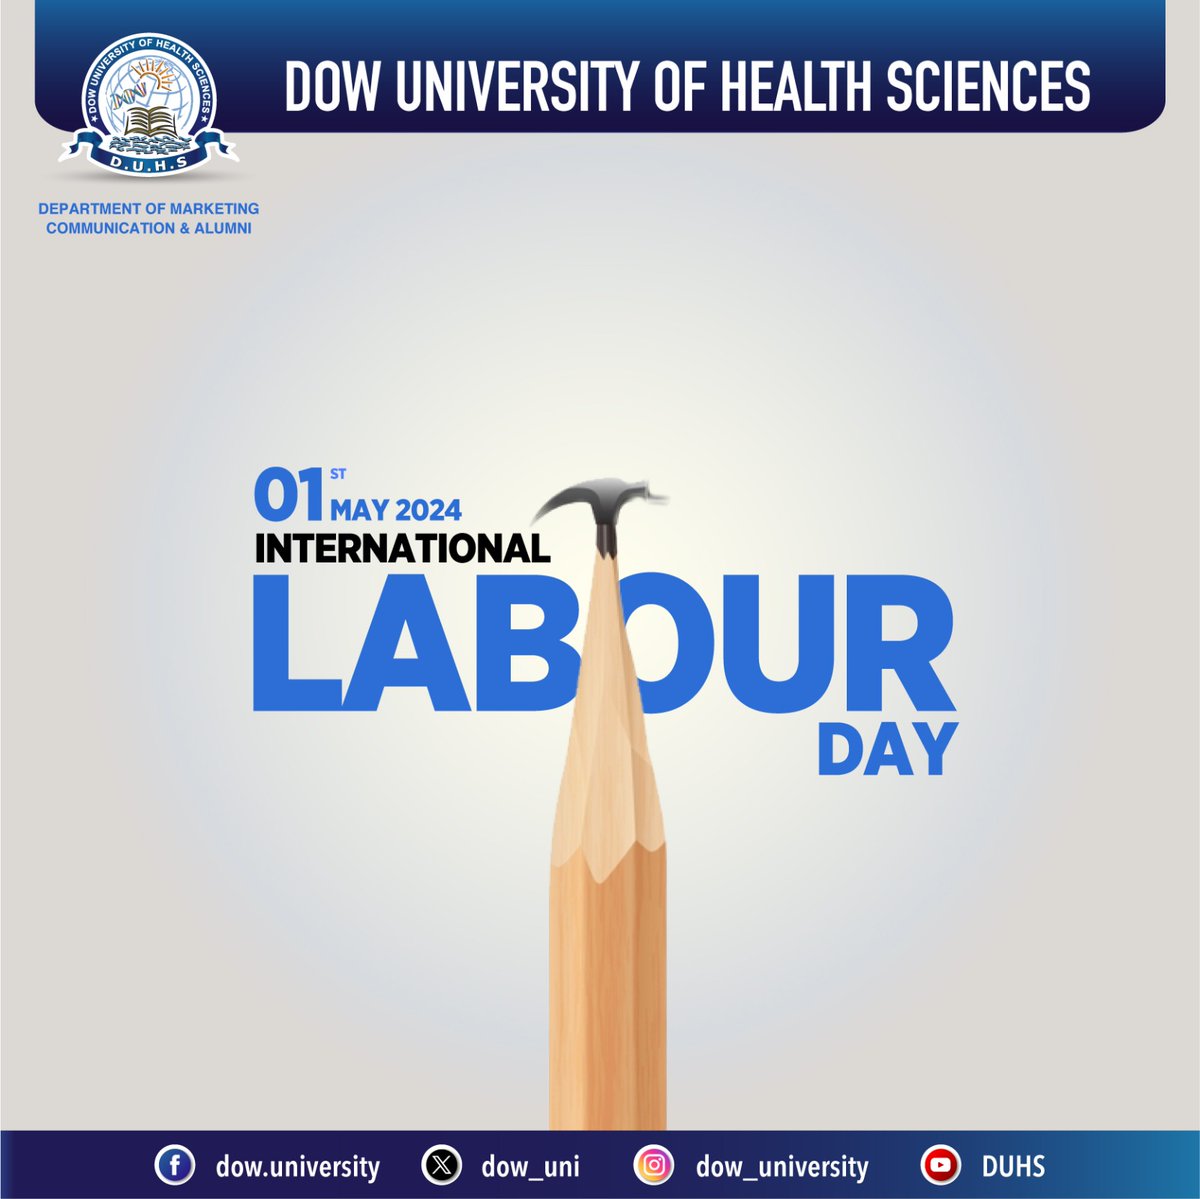 1st May - International Labour Day Honoring the backbone of our society this Labour Day. Cheers to the workers who build dreams and shape our world. #DUHS #LabourDay